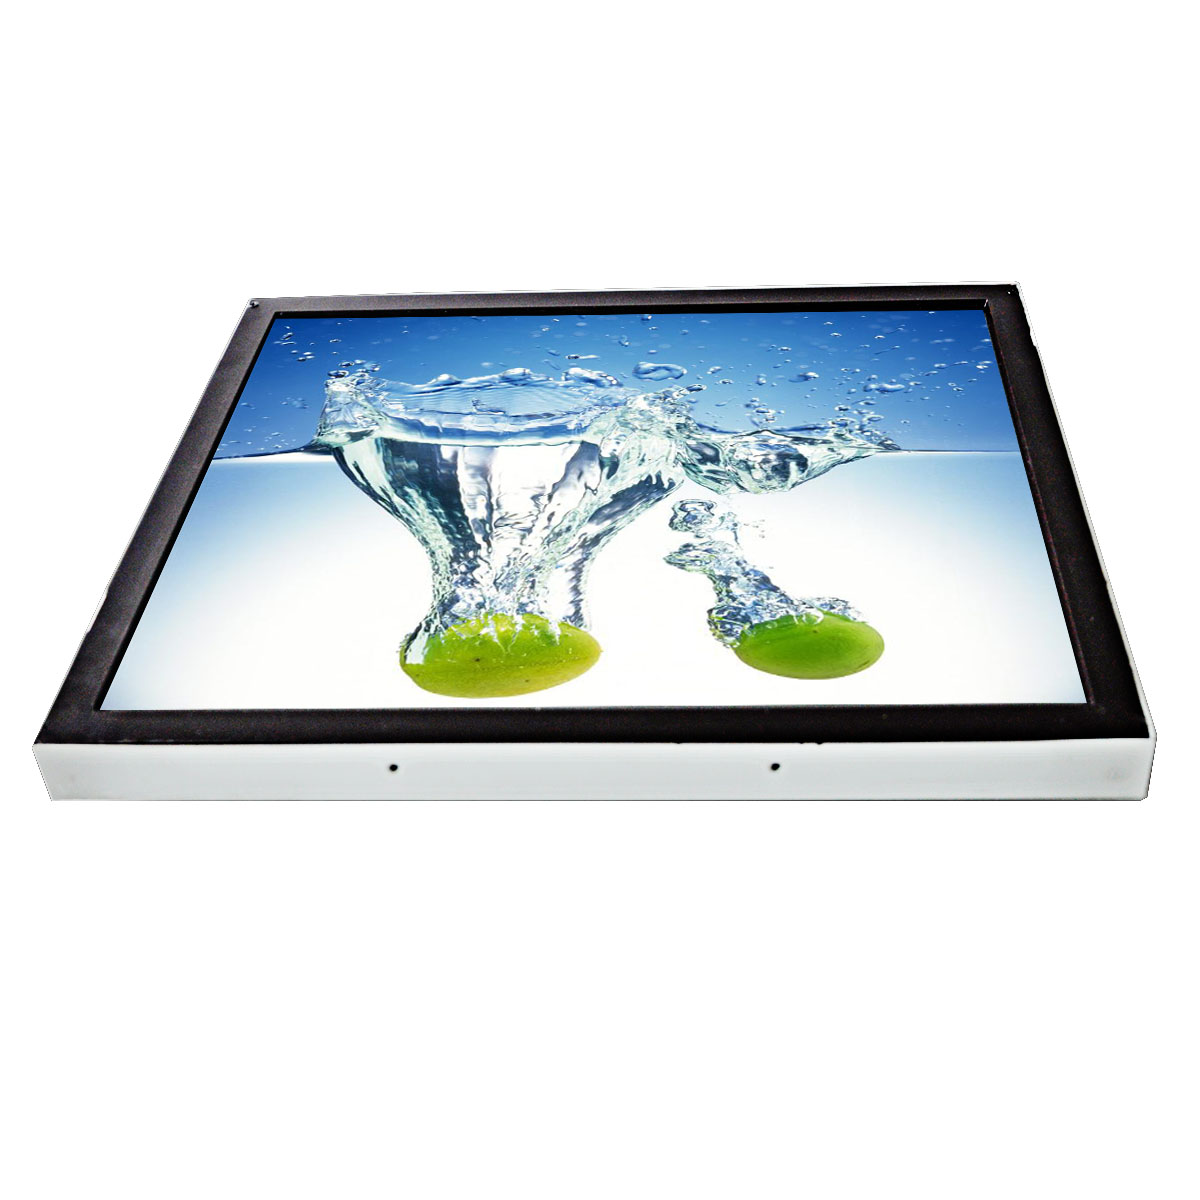 https://www.cjtouch.com/19-इंच-ip65-waterproof-infrared-pc-monitor-touch-screen-product/